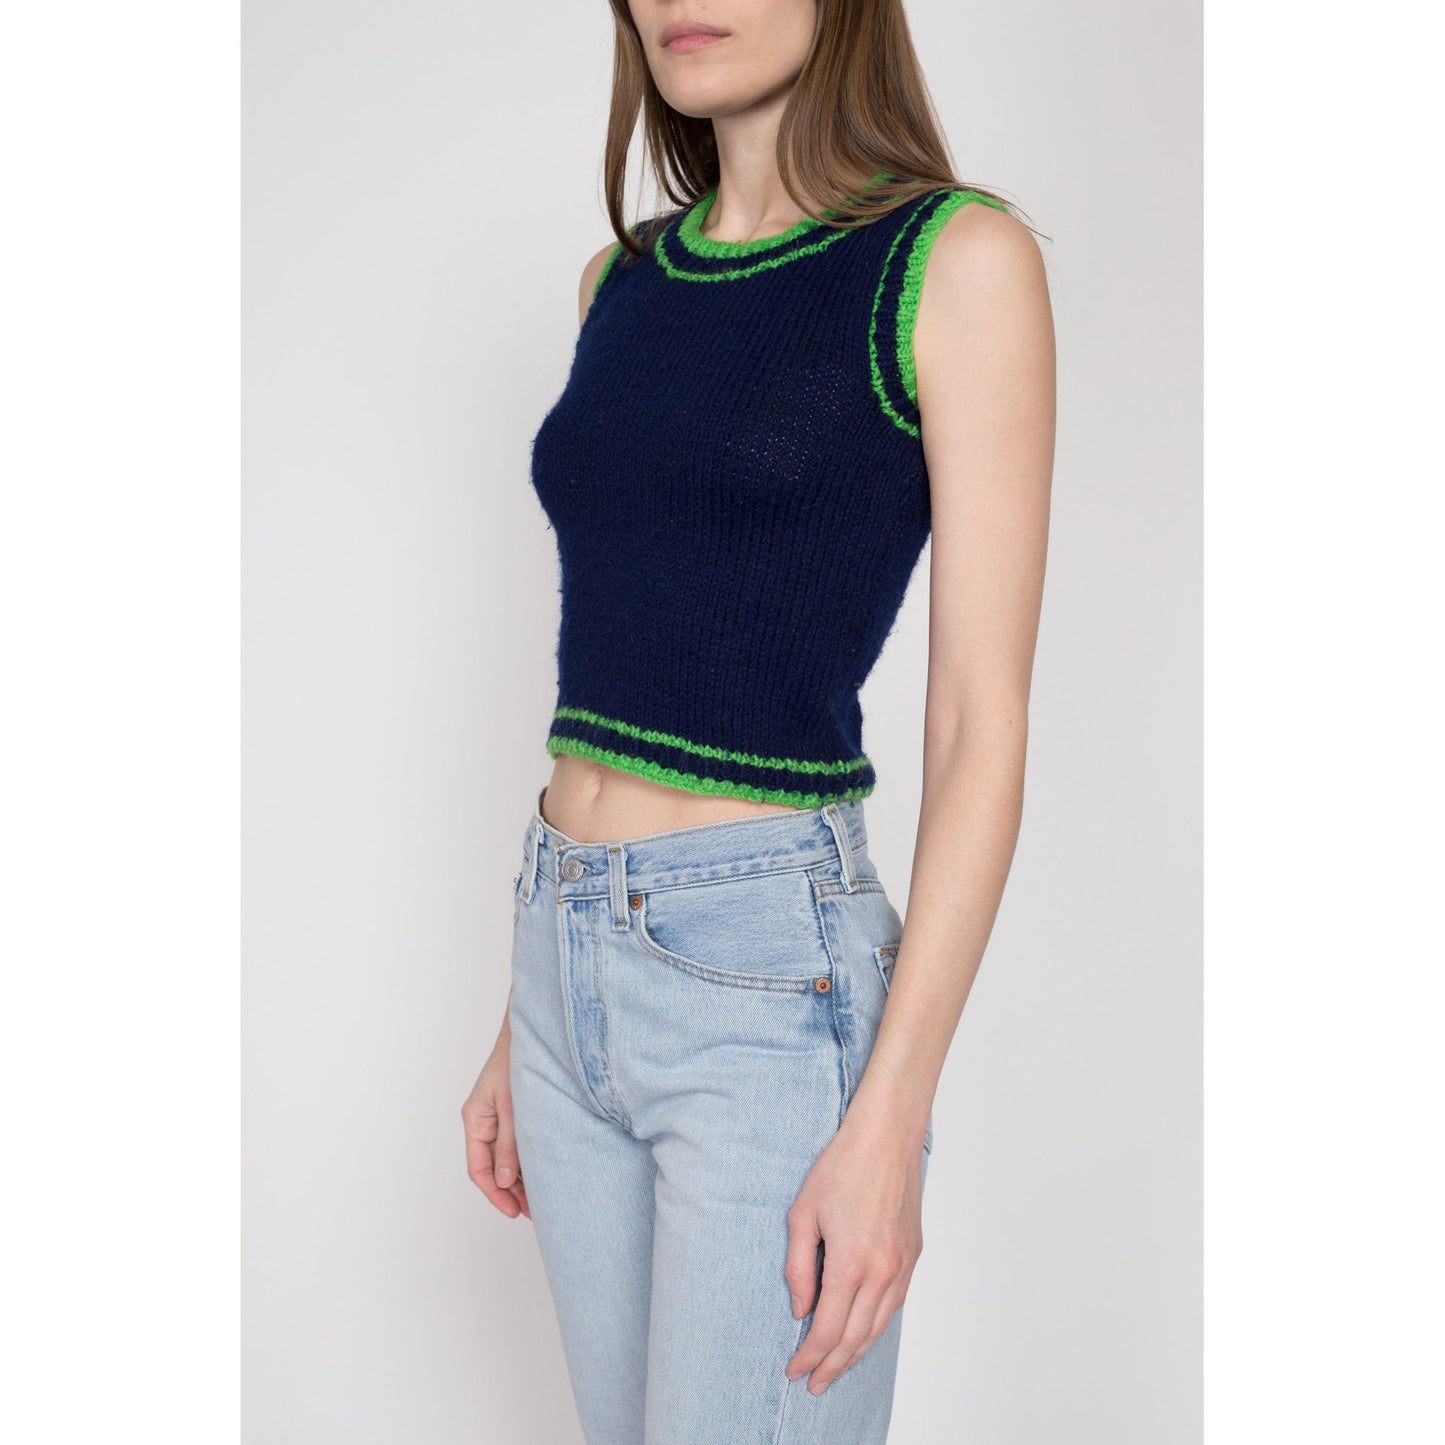 Small 70s Navy Ringer Knit Crop Top | Vintage Cropped Sleeveless Sweater Vest